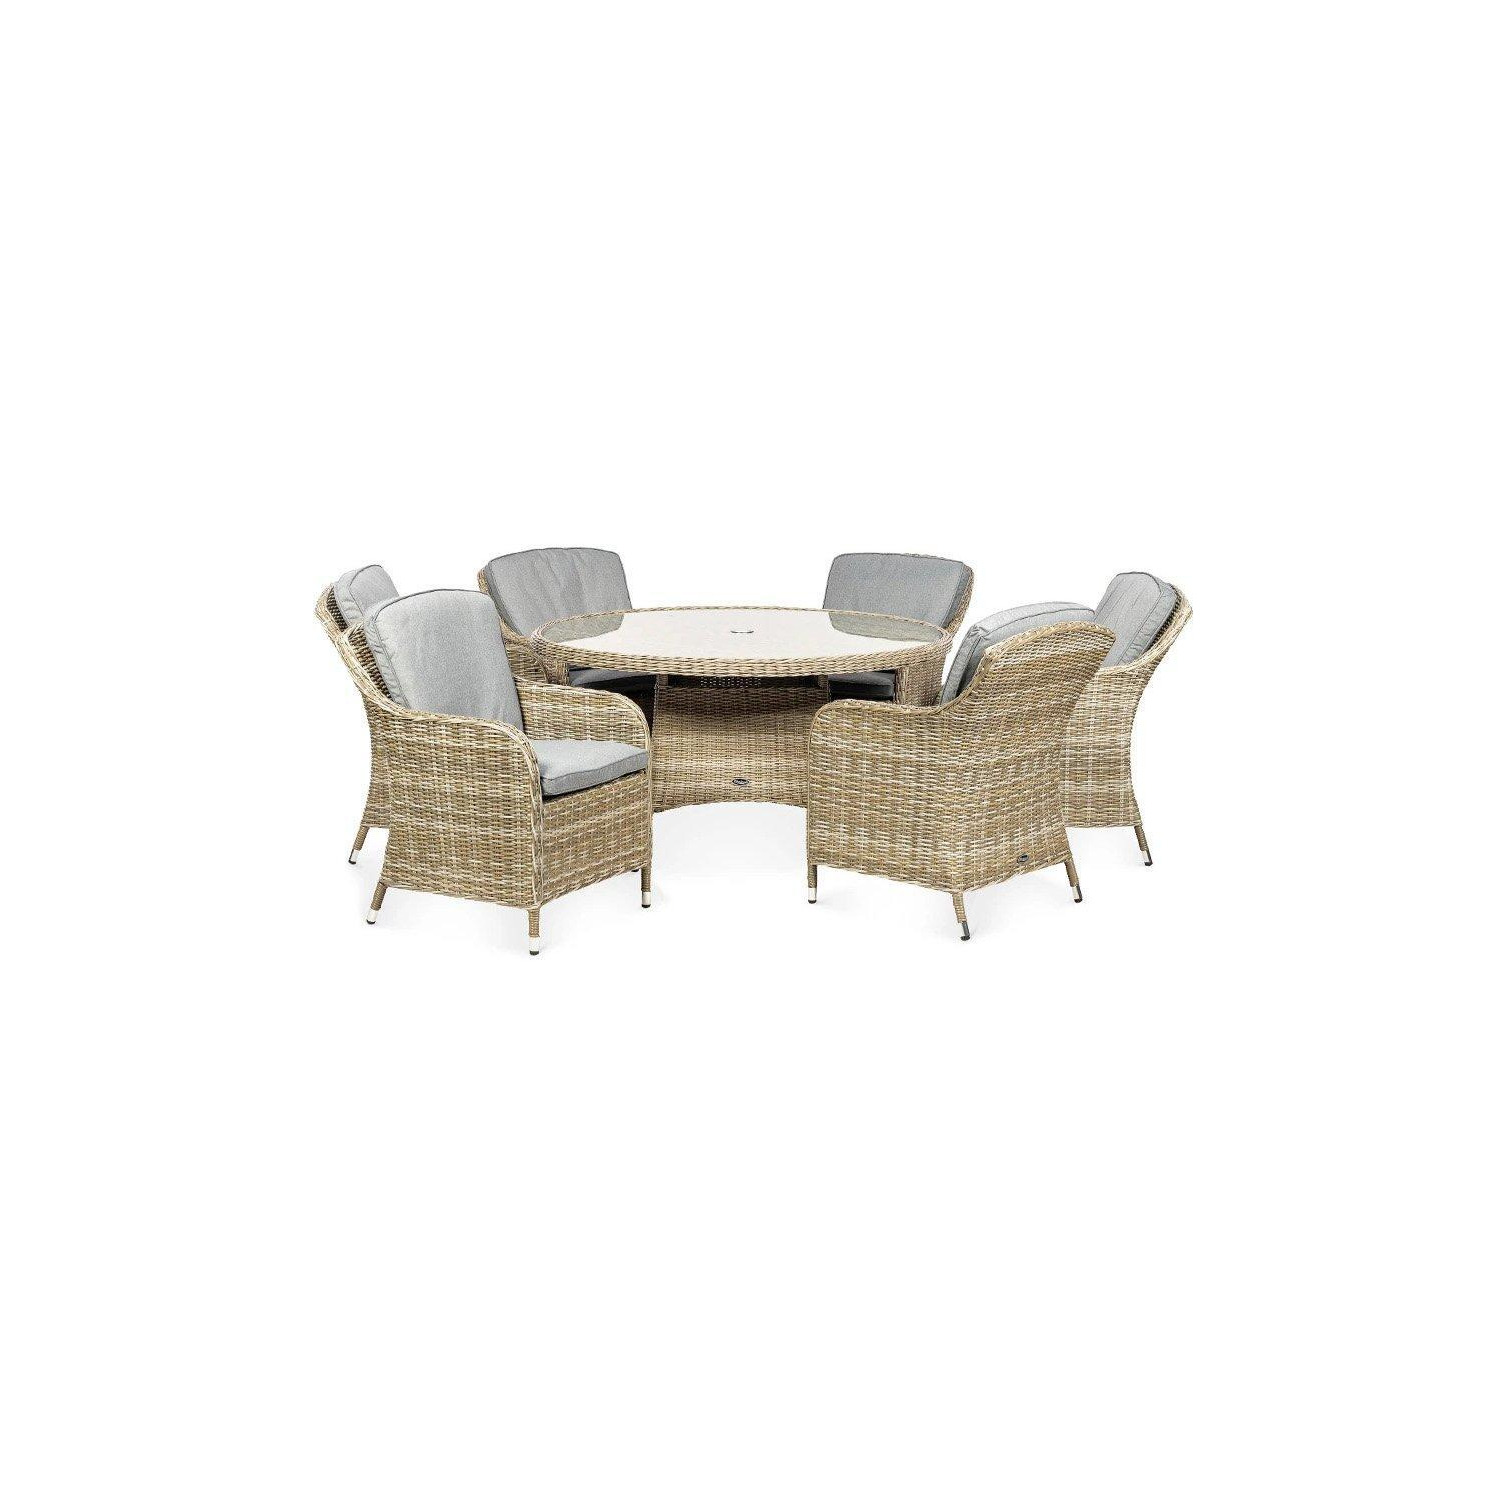 WENTWORTH 6 Seater Round Imperial Dining Set - image 1